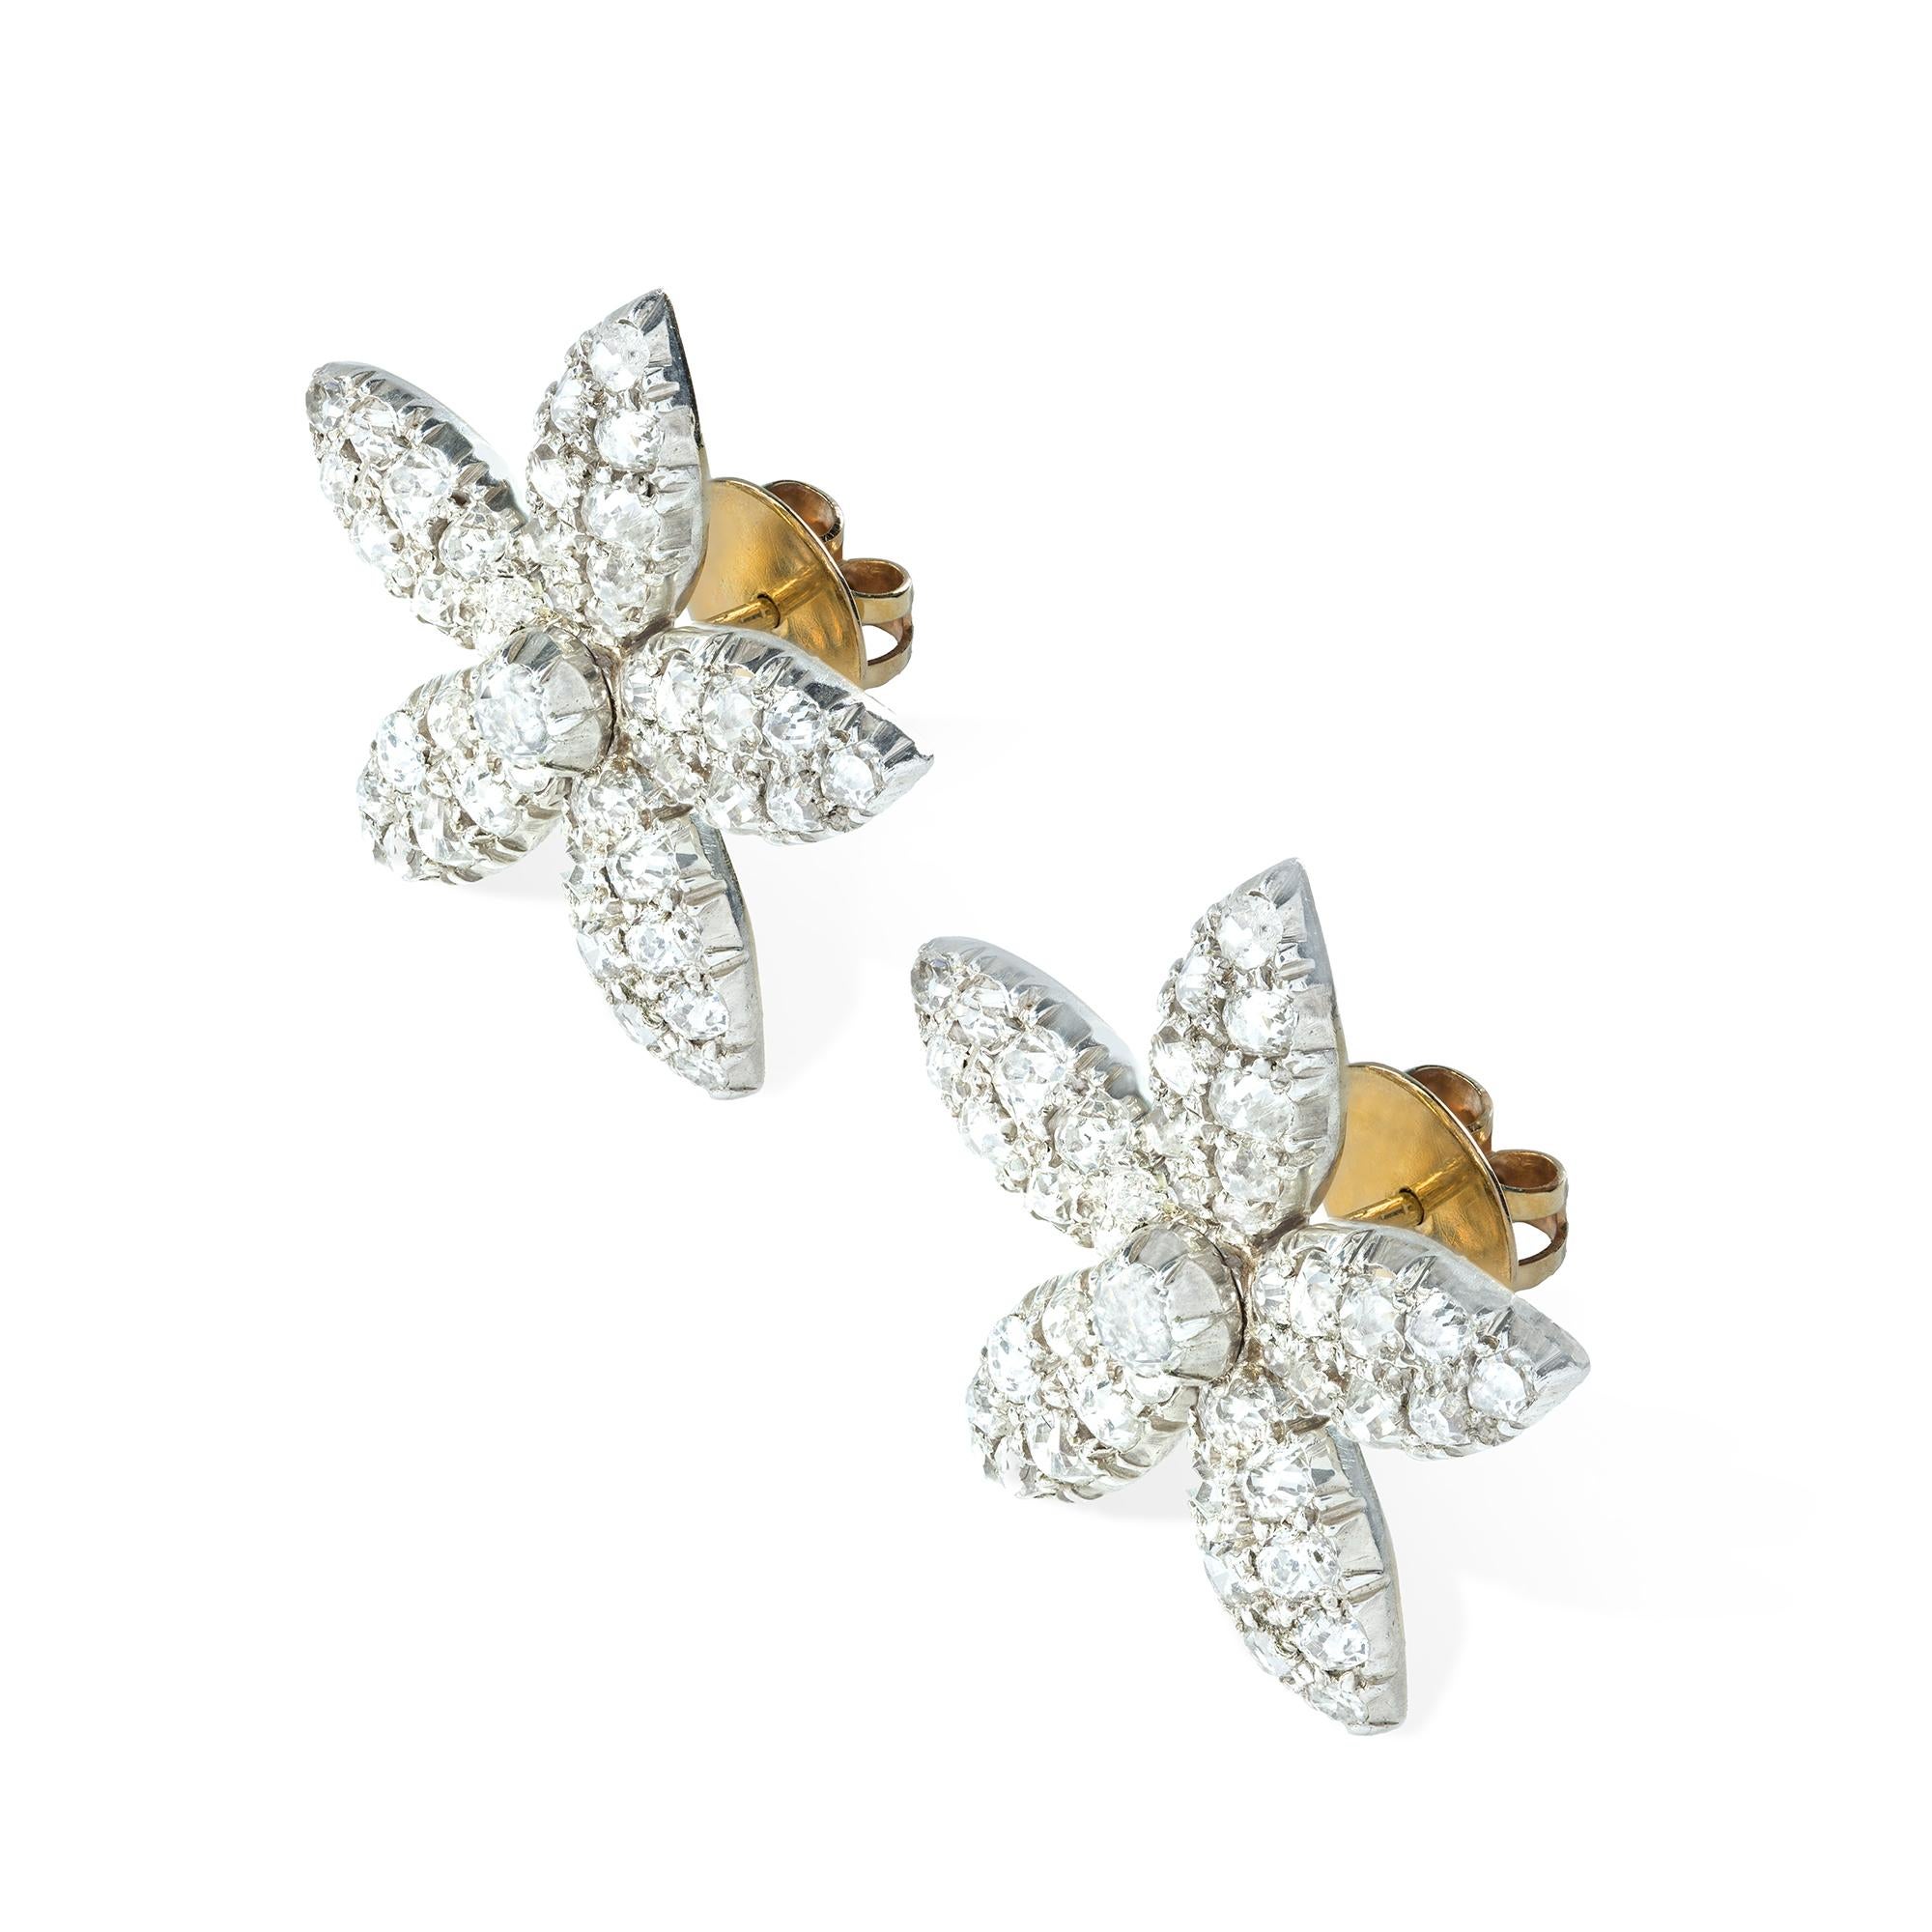 A pair of Victorian jasmine diamond earrings, each in the design of a five-petalled diamond encrusted jasmine head with a central old brilliant-cut diamond, the diamonds estimated to weigh a total of approximately 5 carats, all cut-down set in